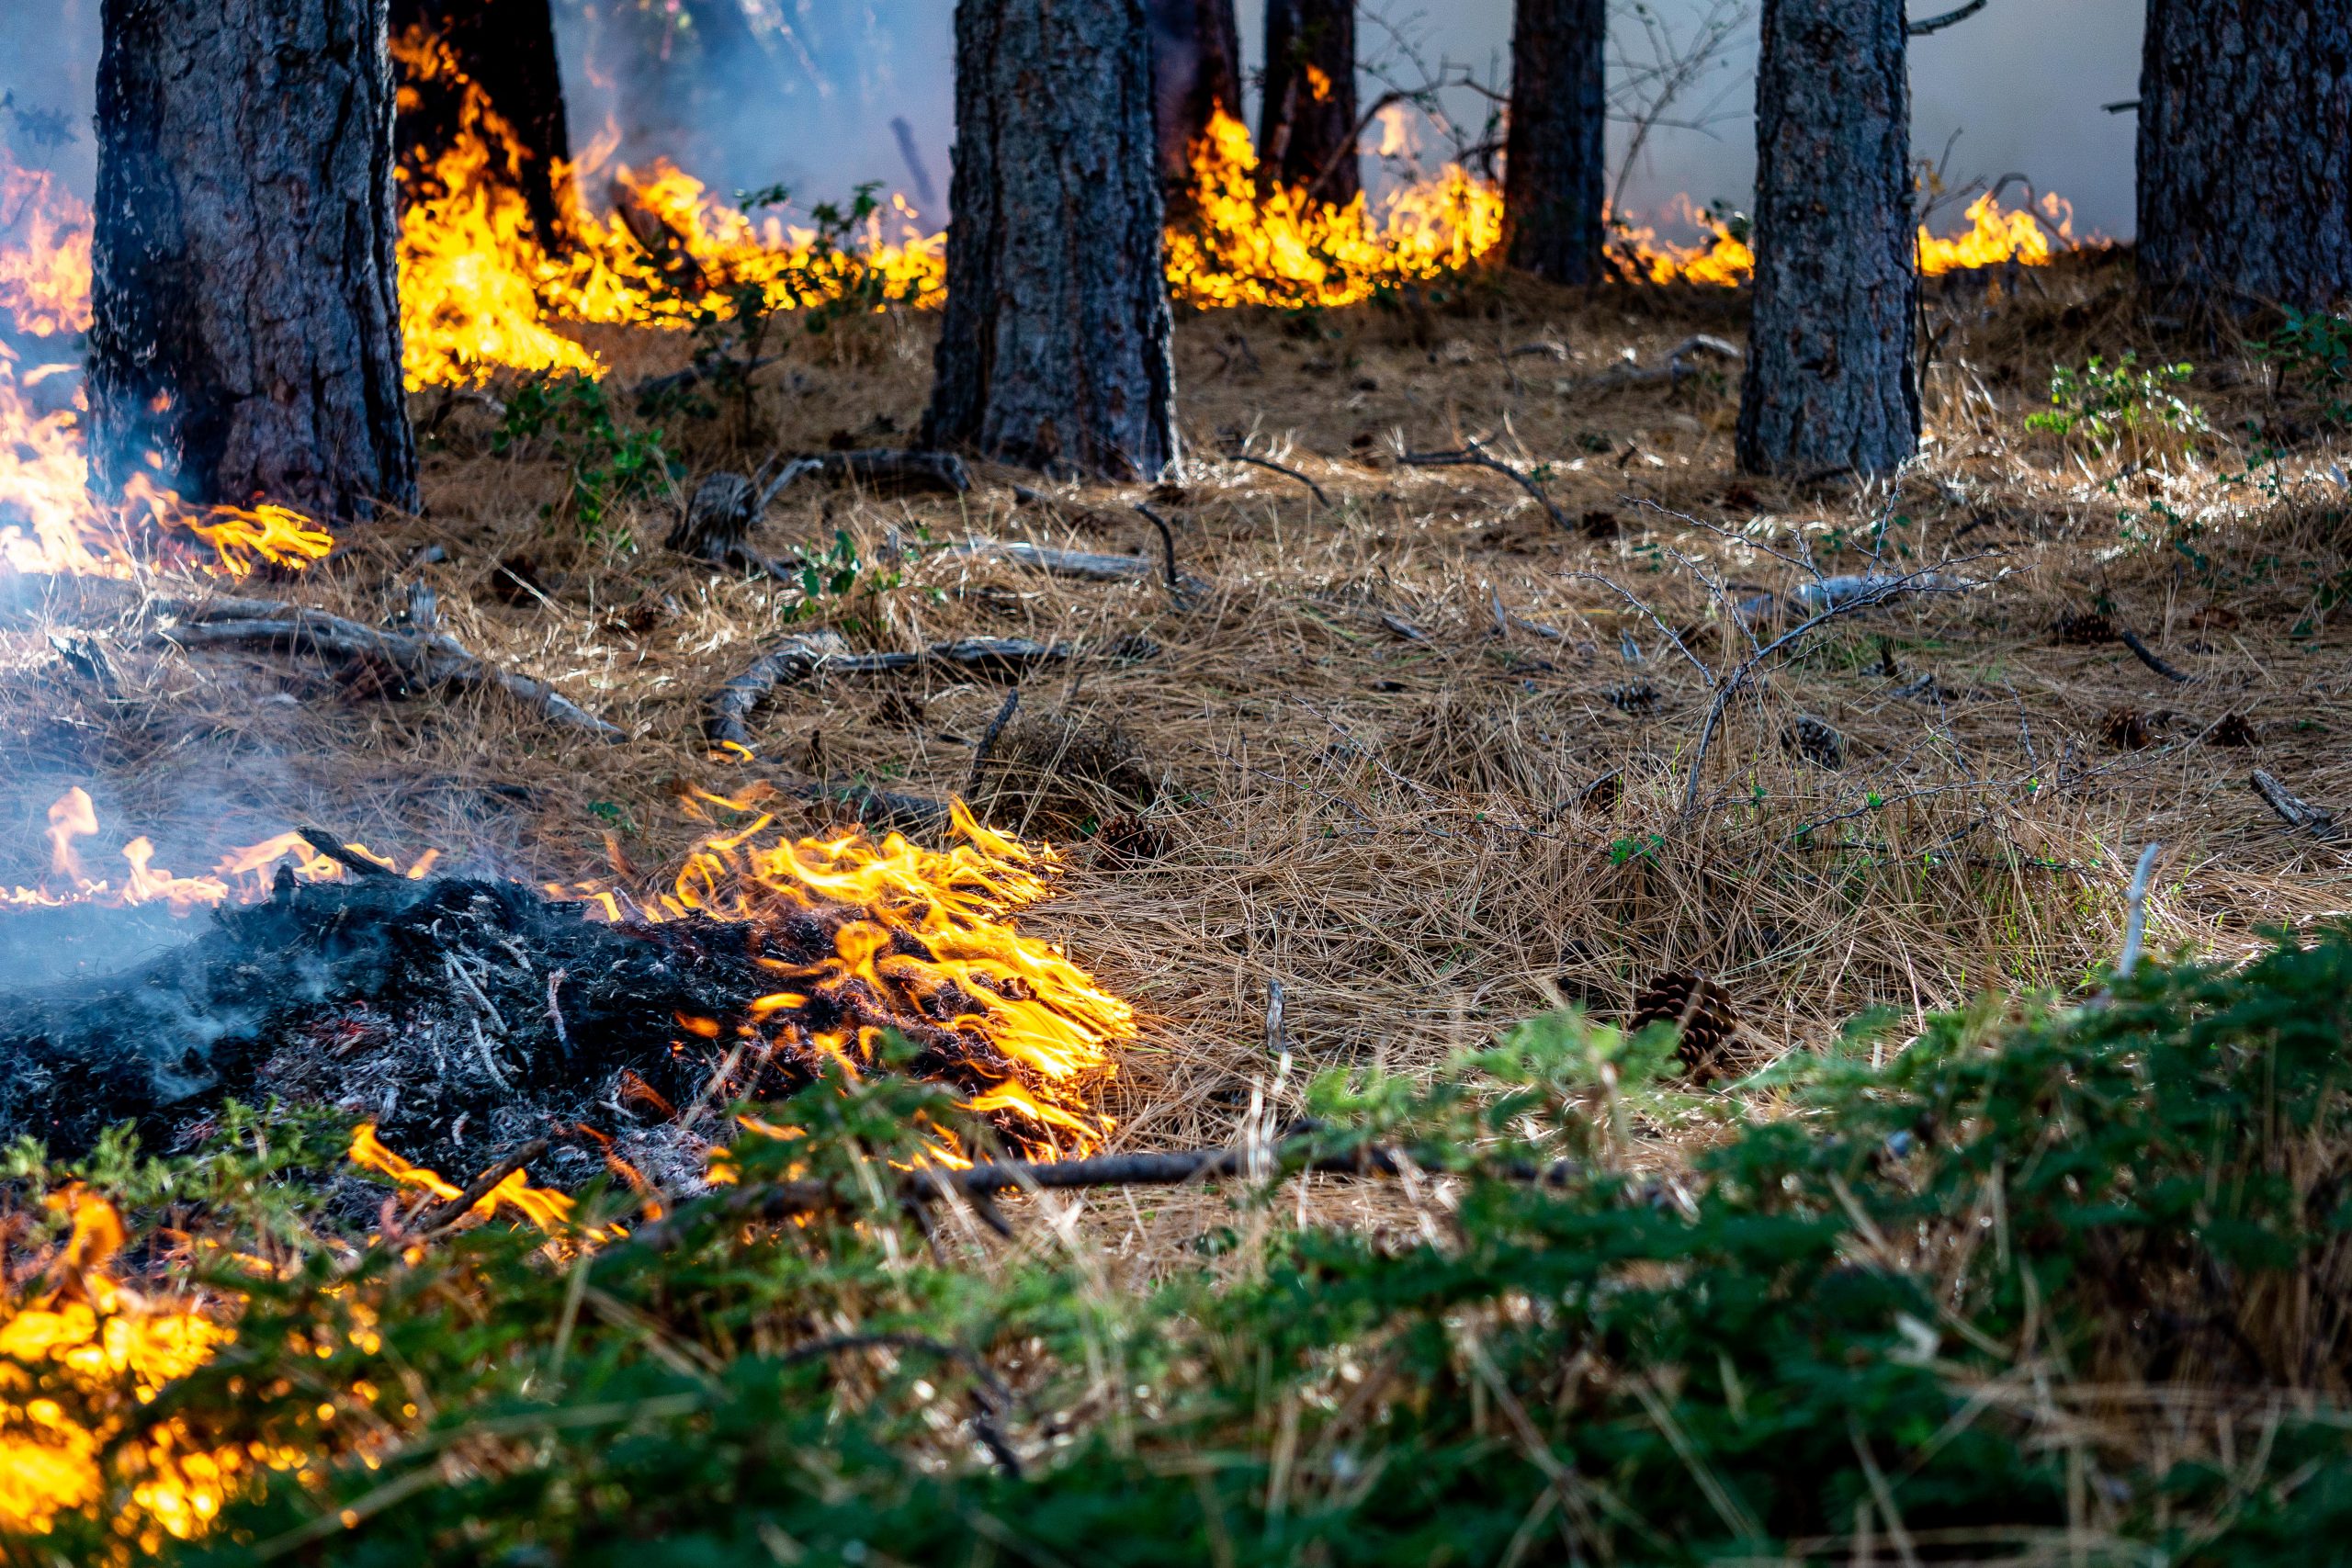 Photograph of a prescribed burn in a pine forest.